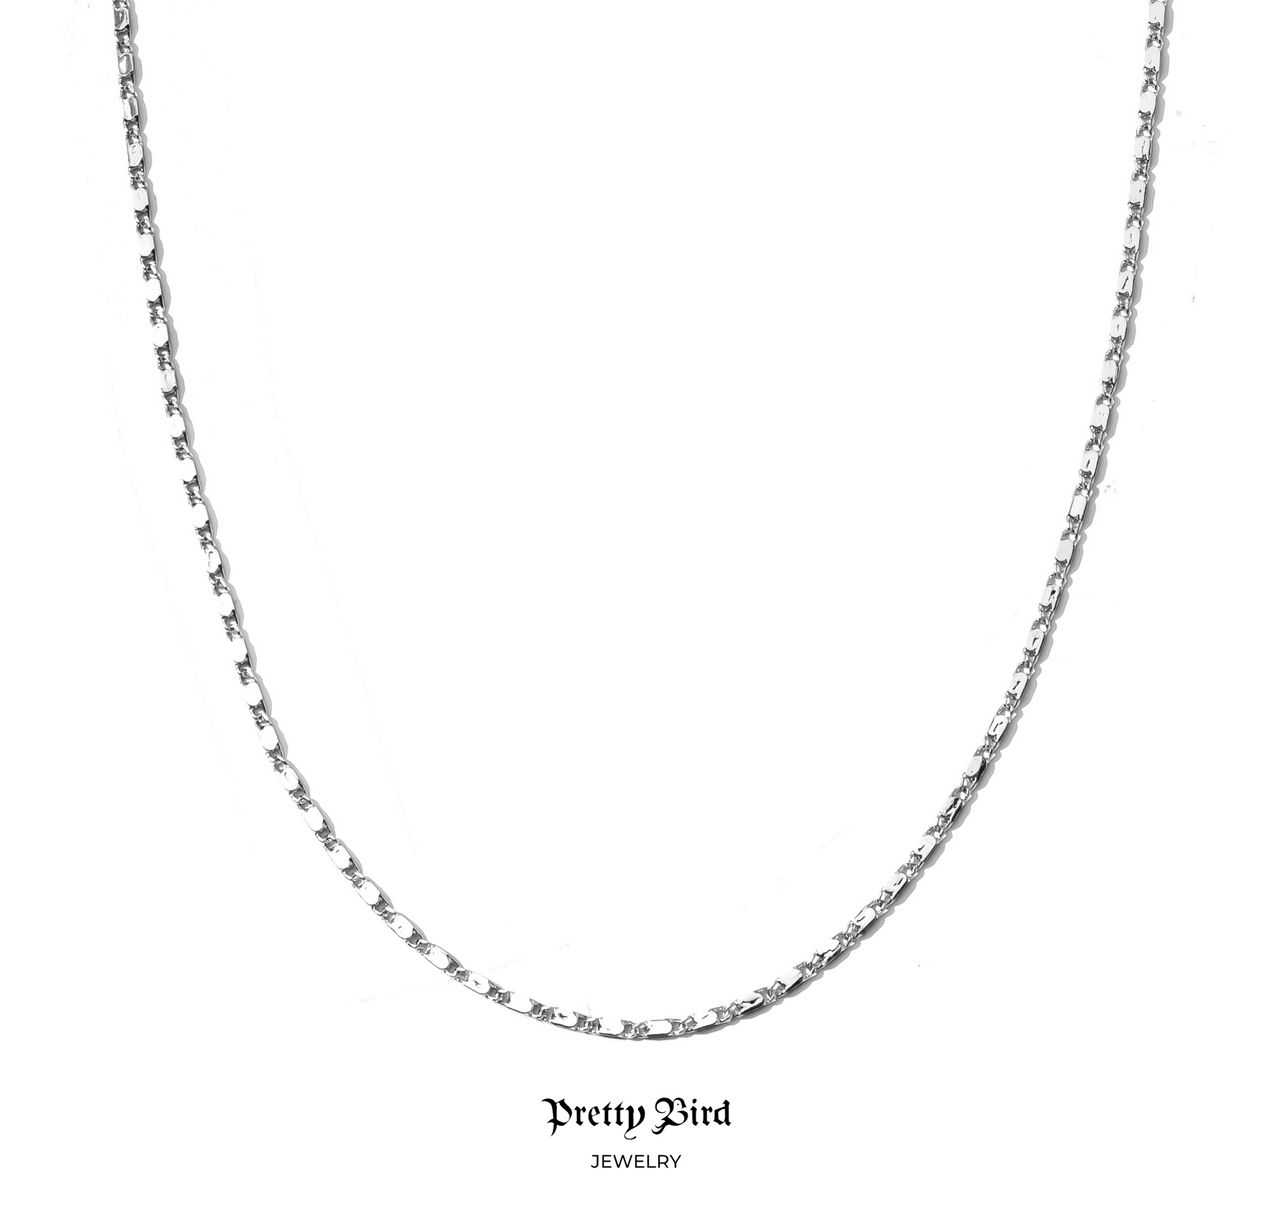 The White Bar Link Necklace